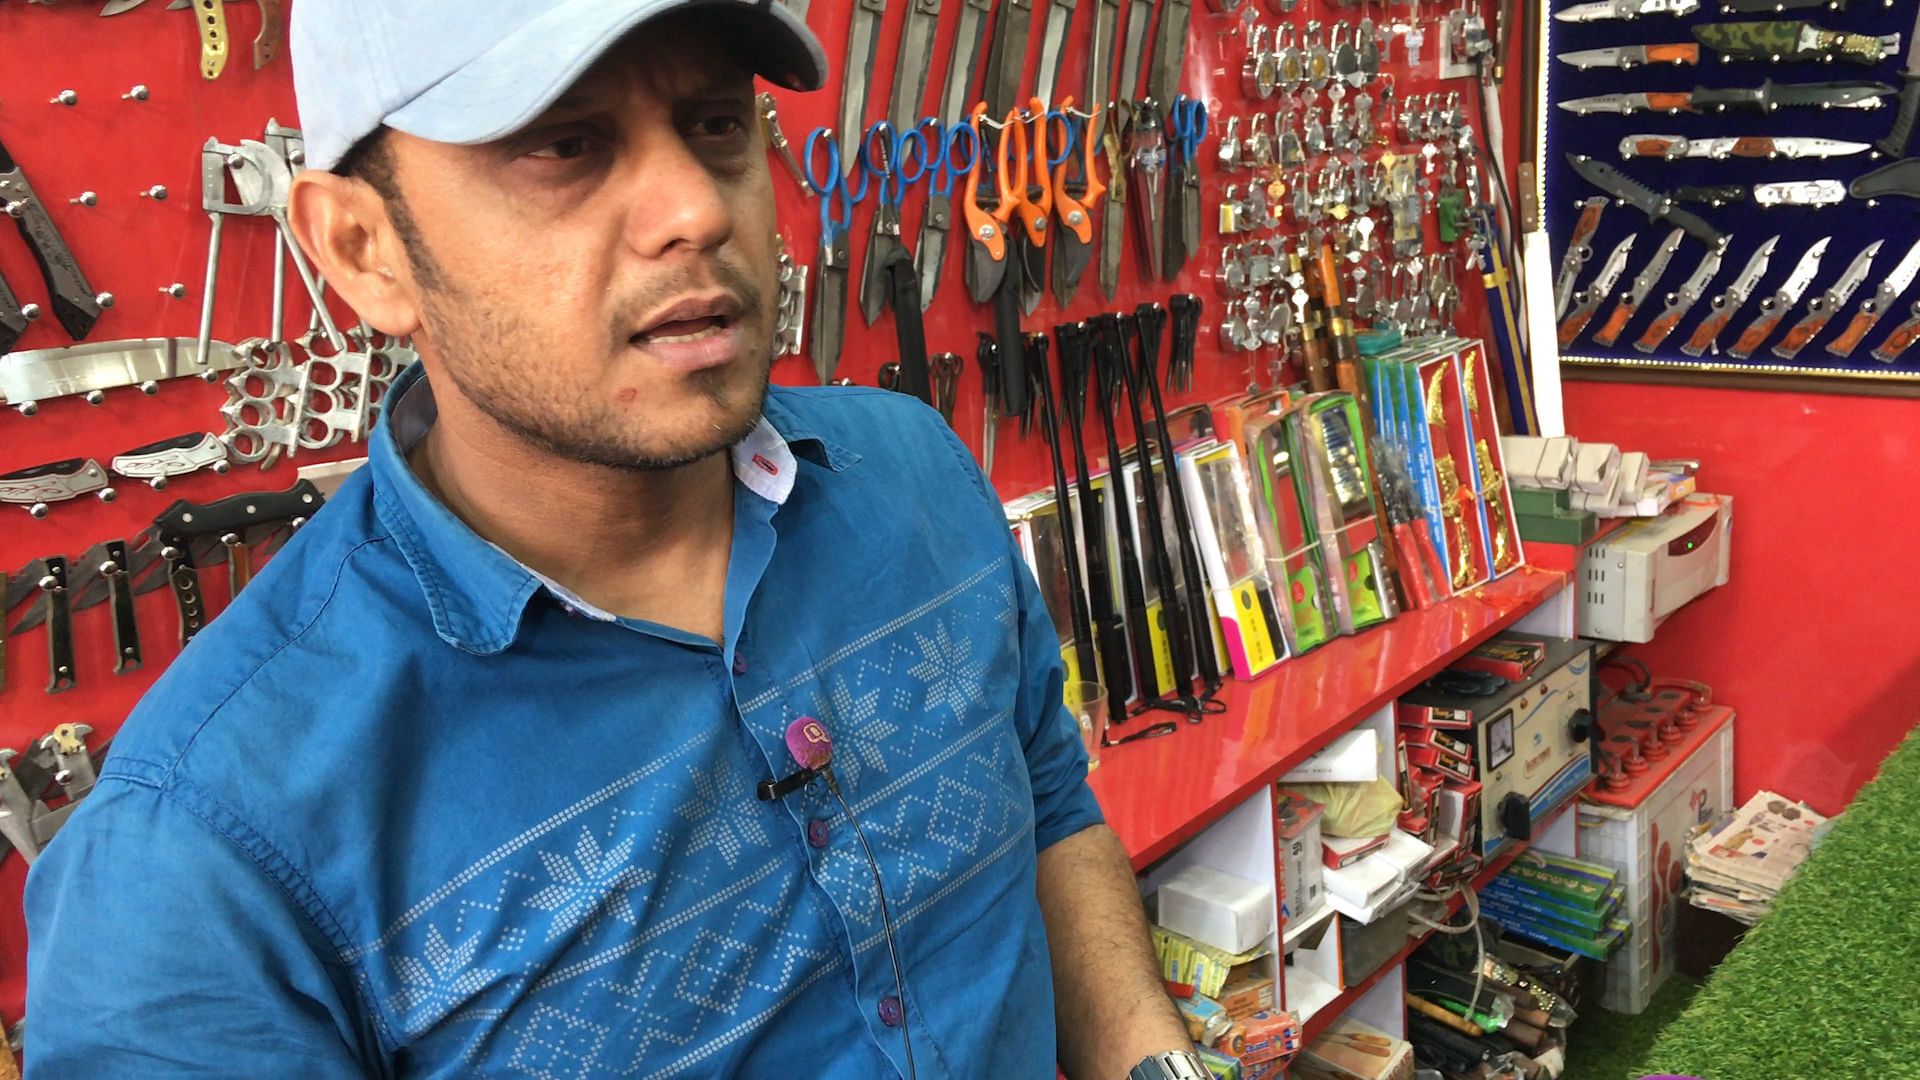 The traders complain of strict laws which have slowed down their knife business. 